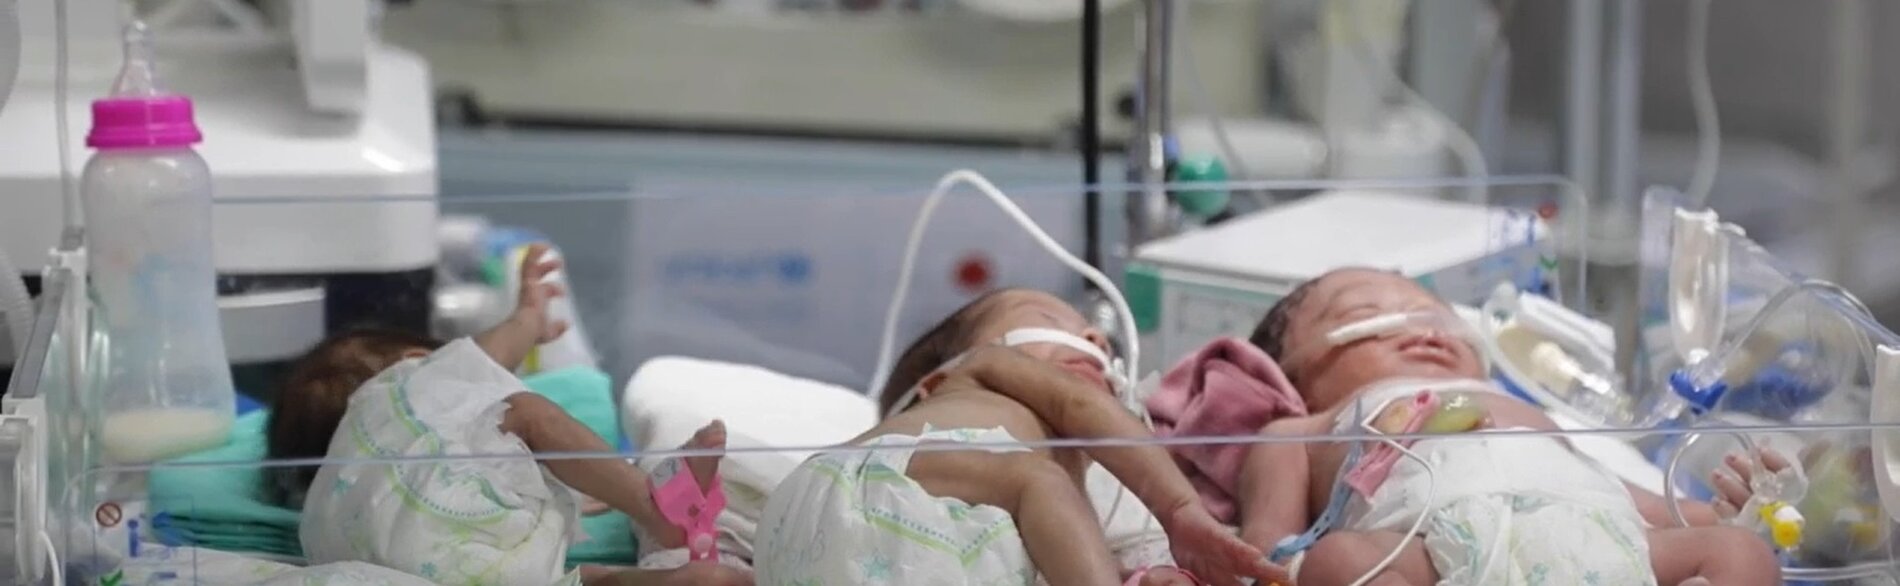 Premature babies at Shifa hospital in Gaza. On 11 November, two babies died when their life support stopped working and 37 babies in incubators are said to be at imminent risk of death. Screenshot from a video by UNICEF, 16 October 2023